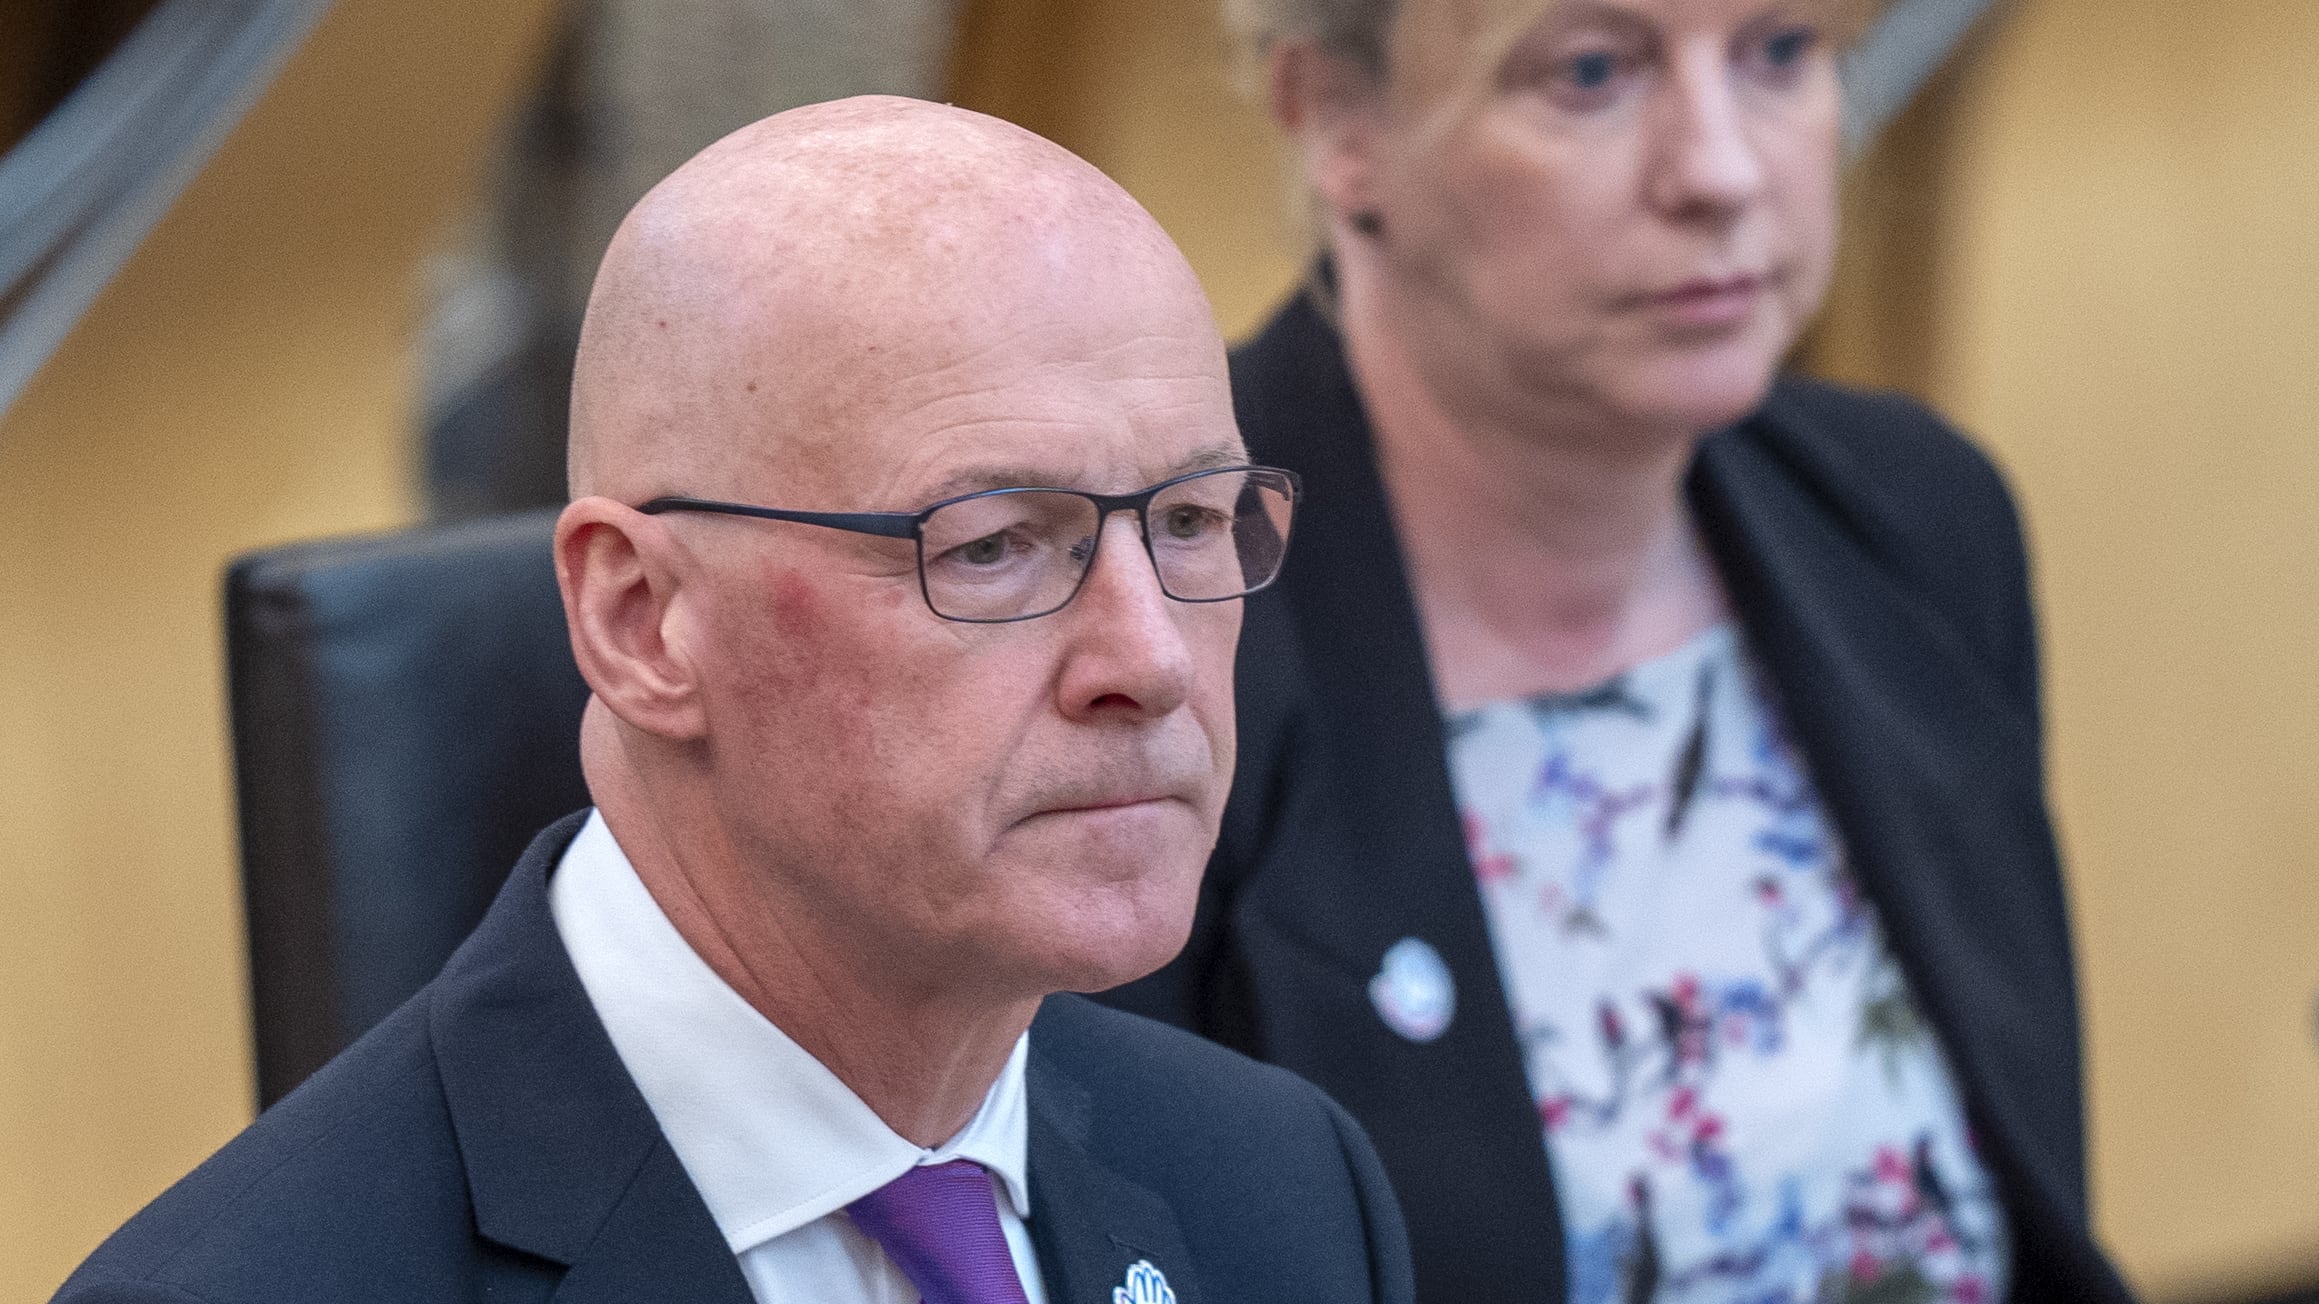 John Swinney said it is ‘unacceptable’ that delays to postal votes may leave some Scots ‘disenfranchised’ in next week’s General Election